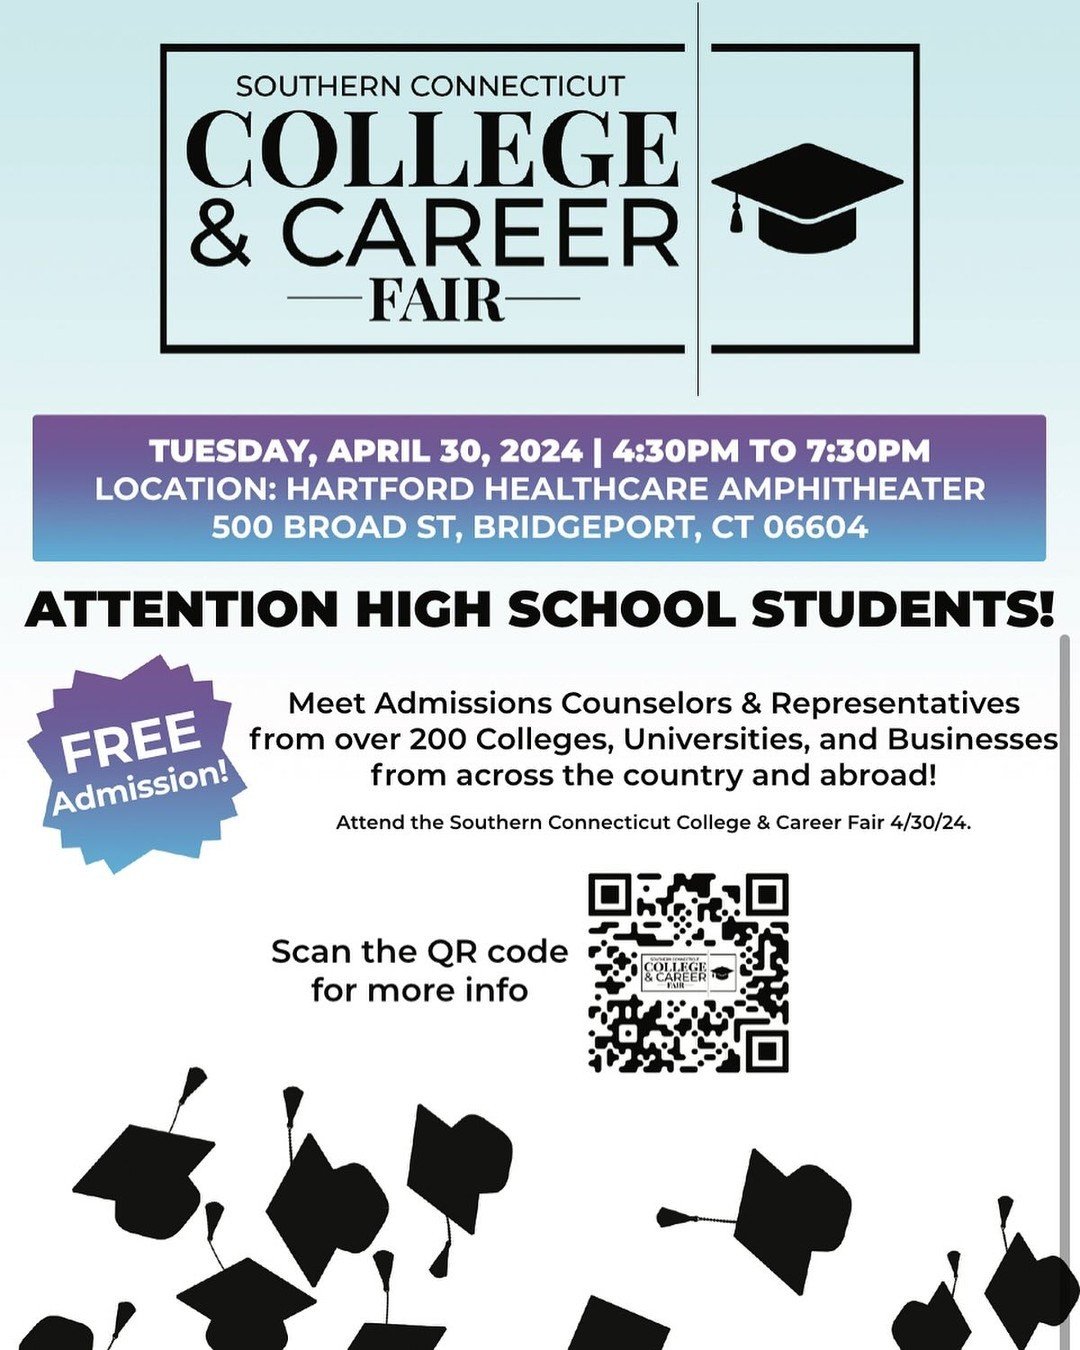 Did you mark your calendar for the area&rsquo;s largest College &amp; Career Fair on Tuesday, April 30th from 4:30pm-7:30pm at the Hartford Healthcare Amphitheater in Bridgeport? The Southern Connecticut College &amp; Career Fair will bring together 